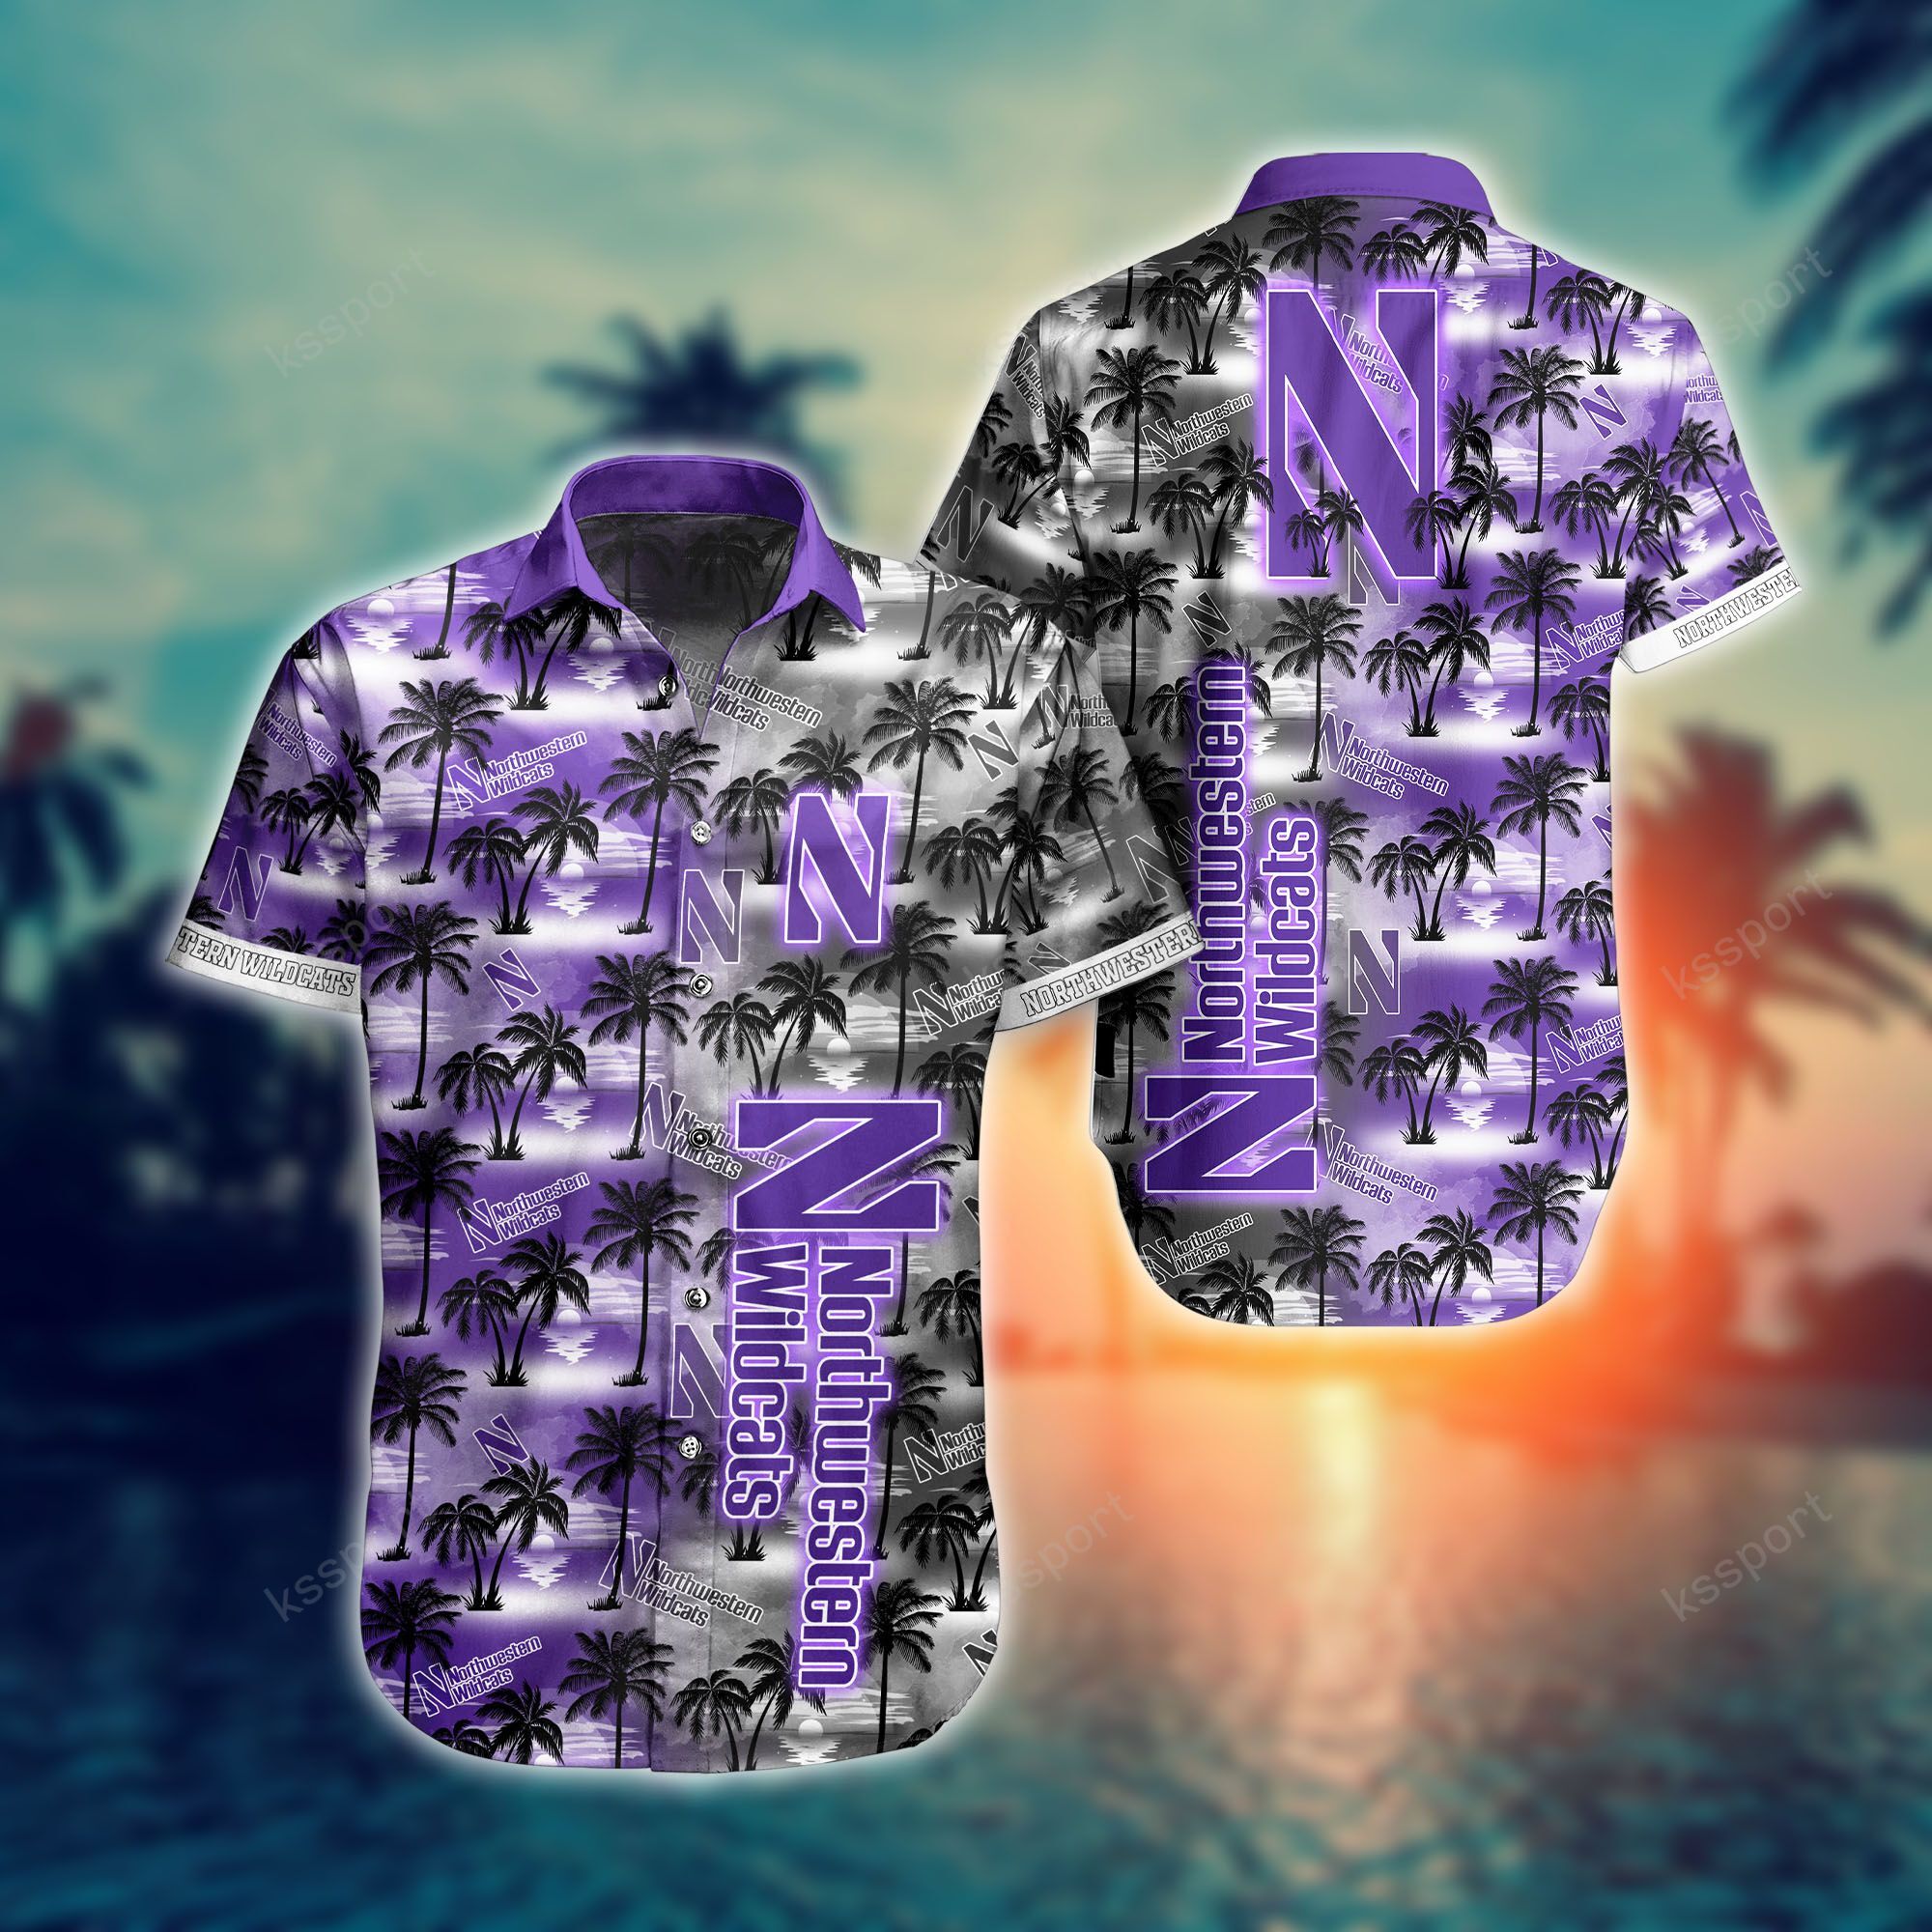 Treat yourself to a cool Hawaiian set today! 45